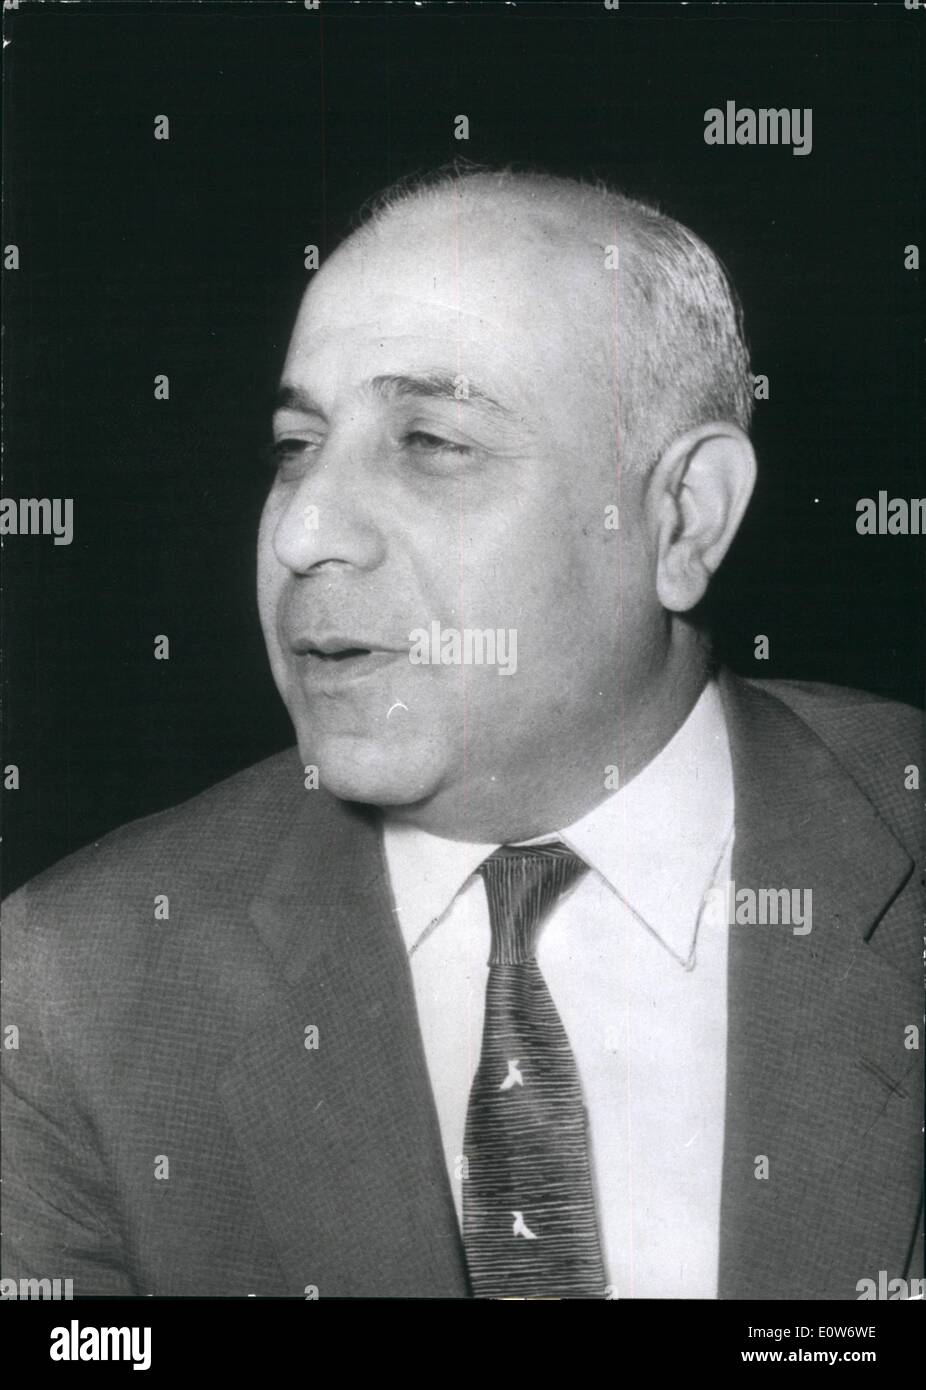 Oct. 10, 1961 - M. Kouzbari, New Chief Of Syrian Government. Photo shows A Recent Portrait Of M. Kouzbari, The New Chief Of The Stock Photo